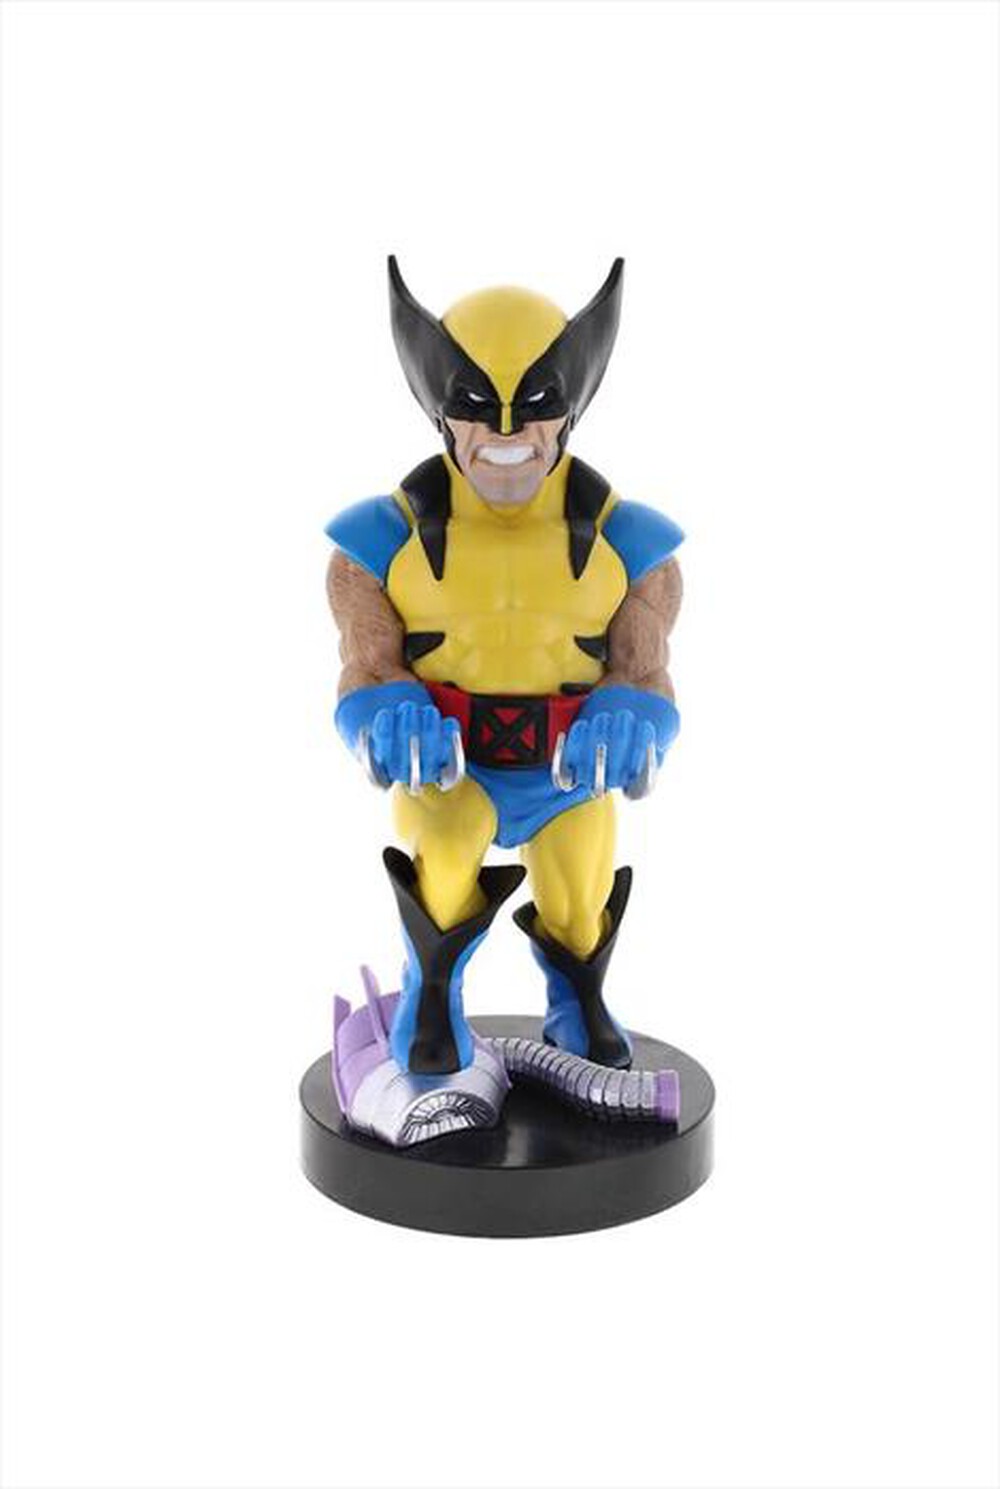 "EXQUISITE GAMING - WOLVERINE CABLE GUY"